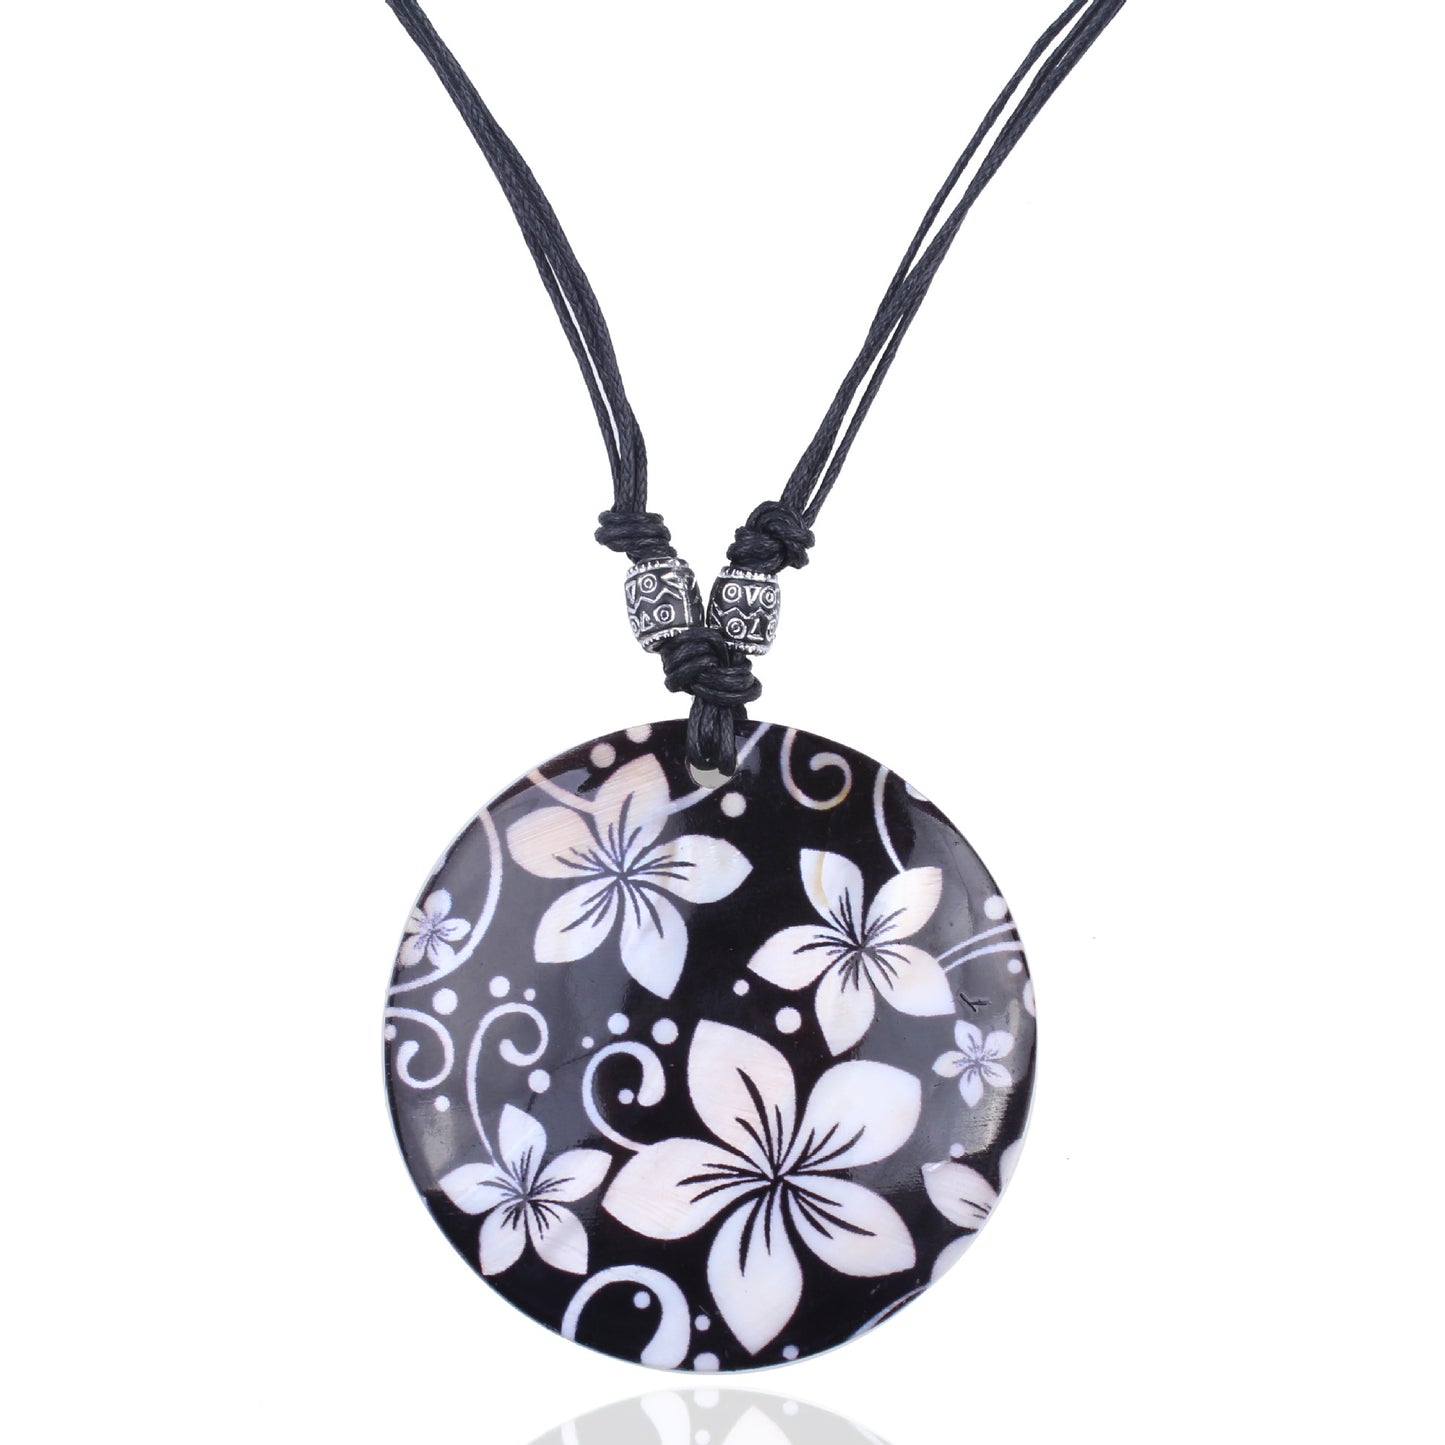 Bohemian ethnic style blue and white porcelain shell painted pendant necklace set